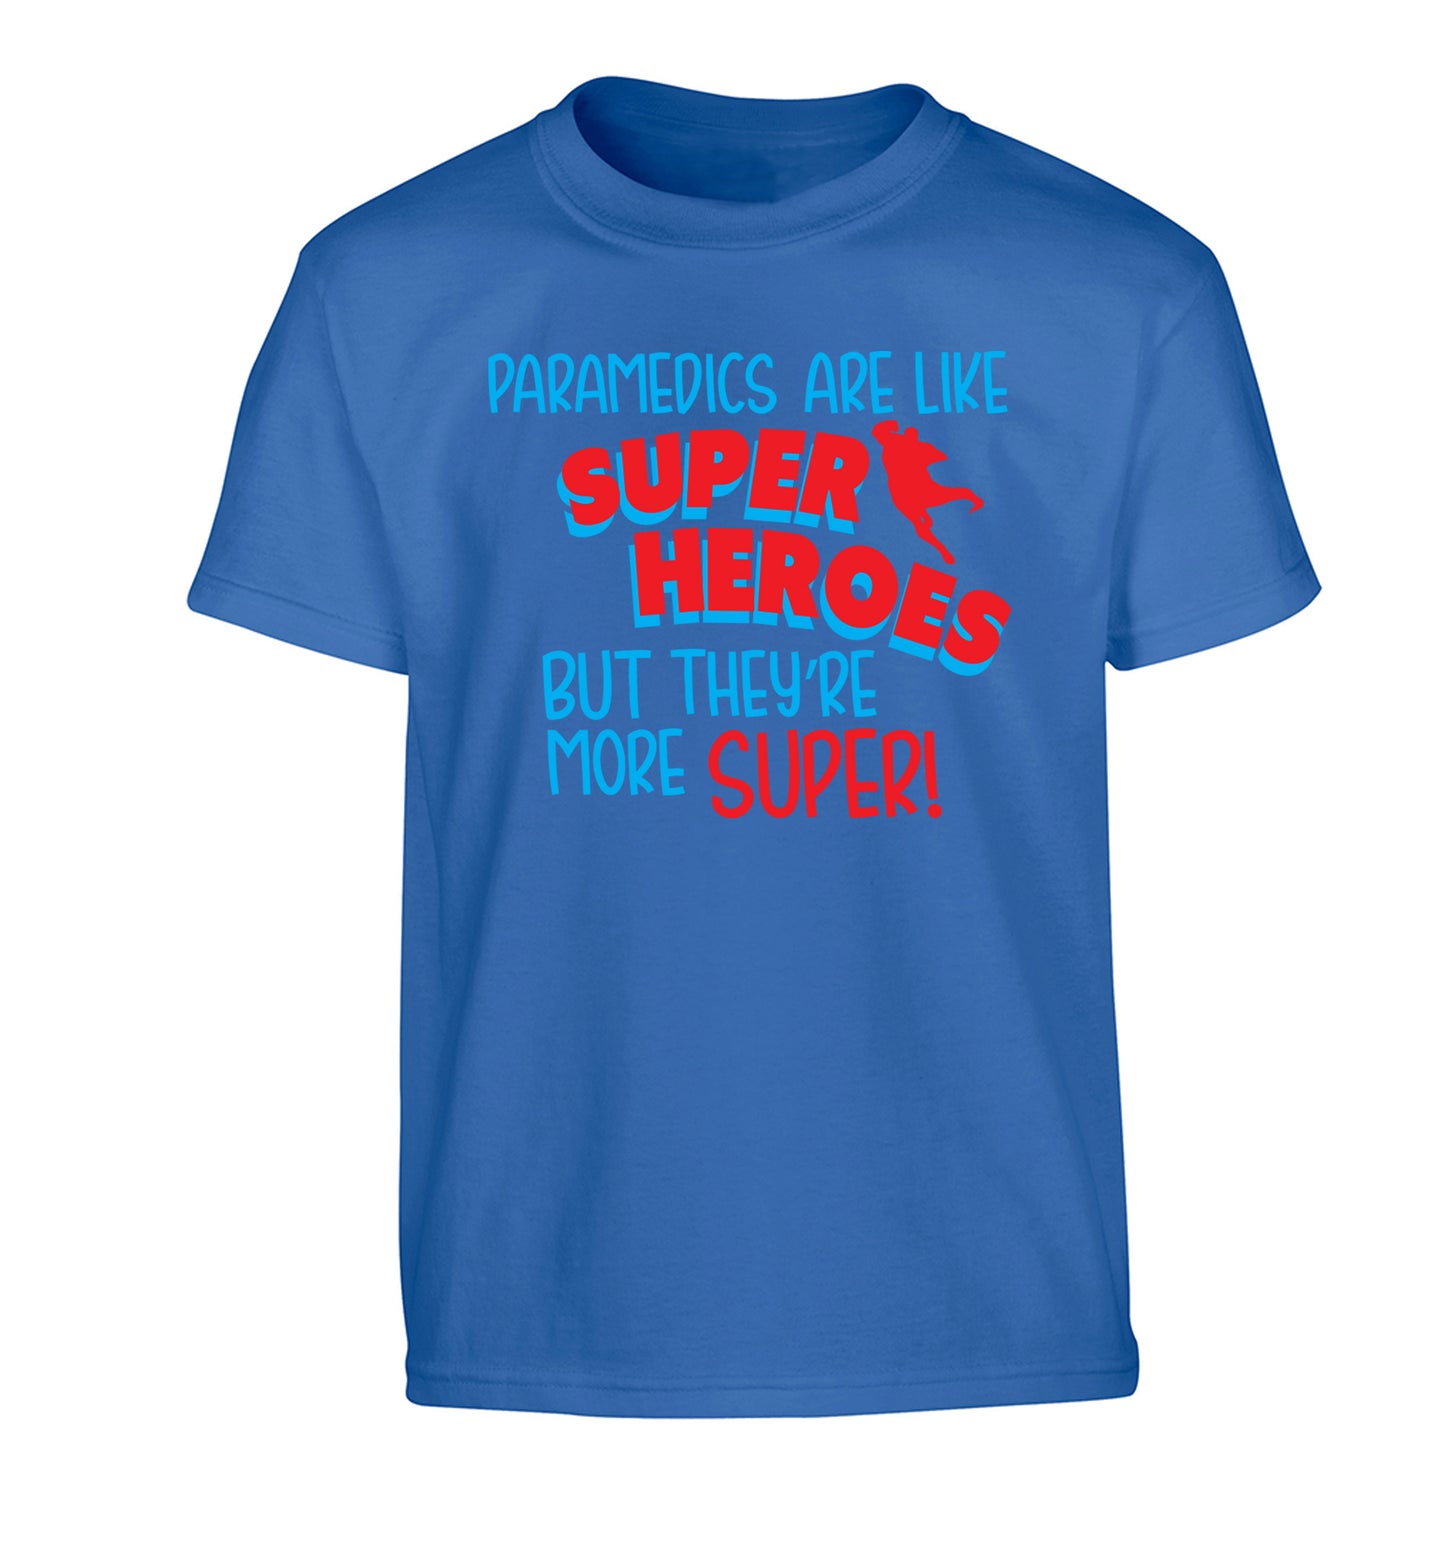 Paramedics are like superheros but they're more super Children's blue Tshirt 12-13 Years